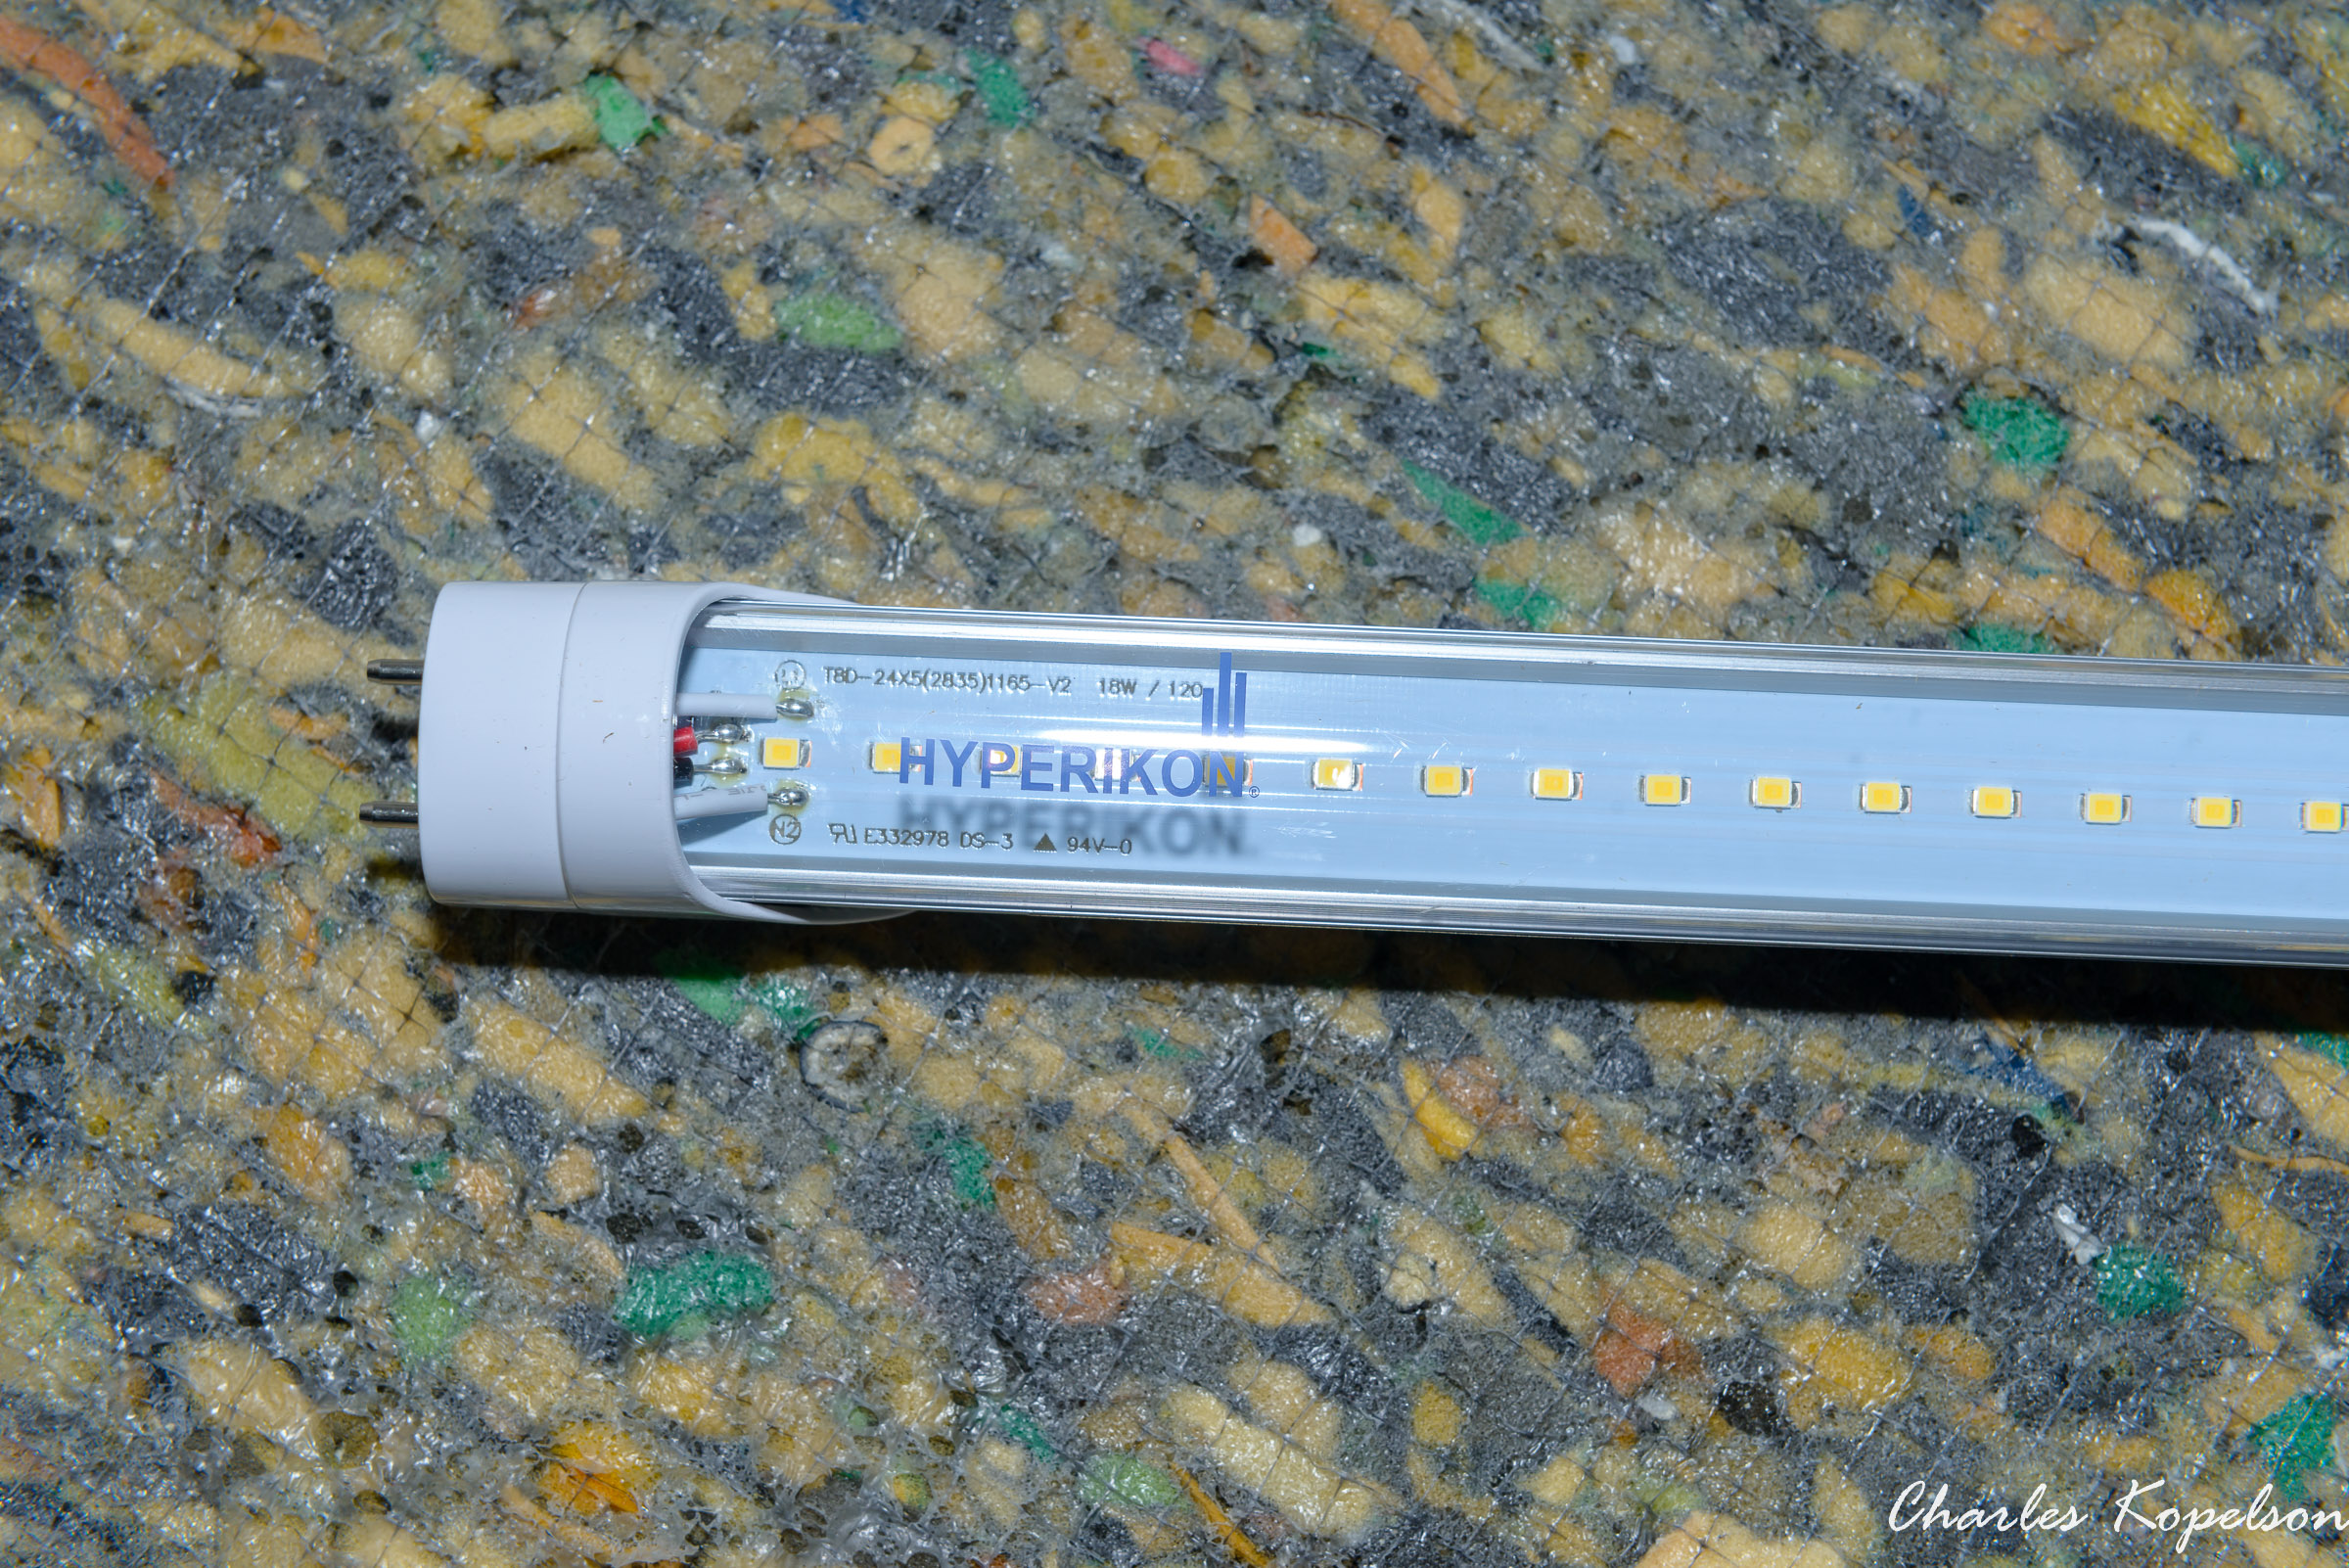 The led side of the new tube